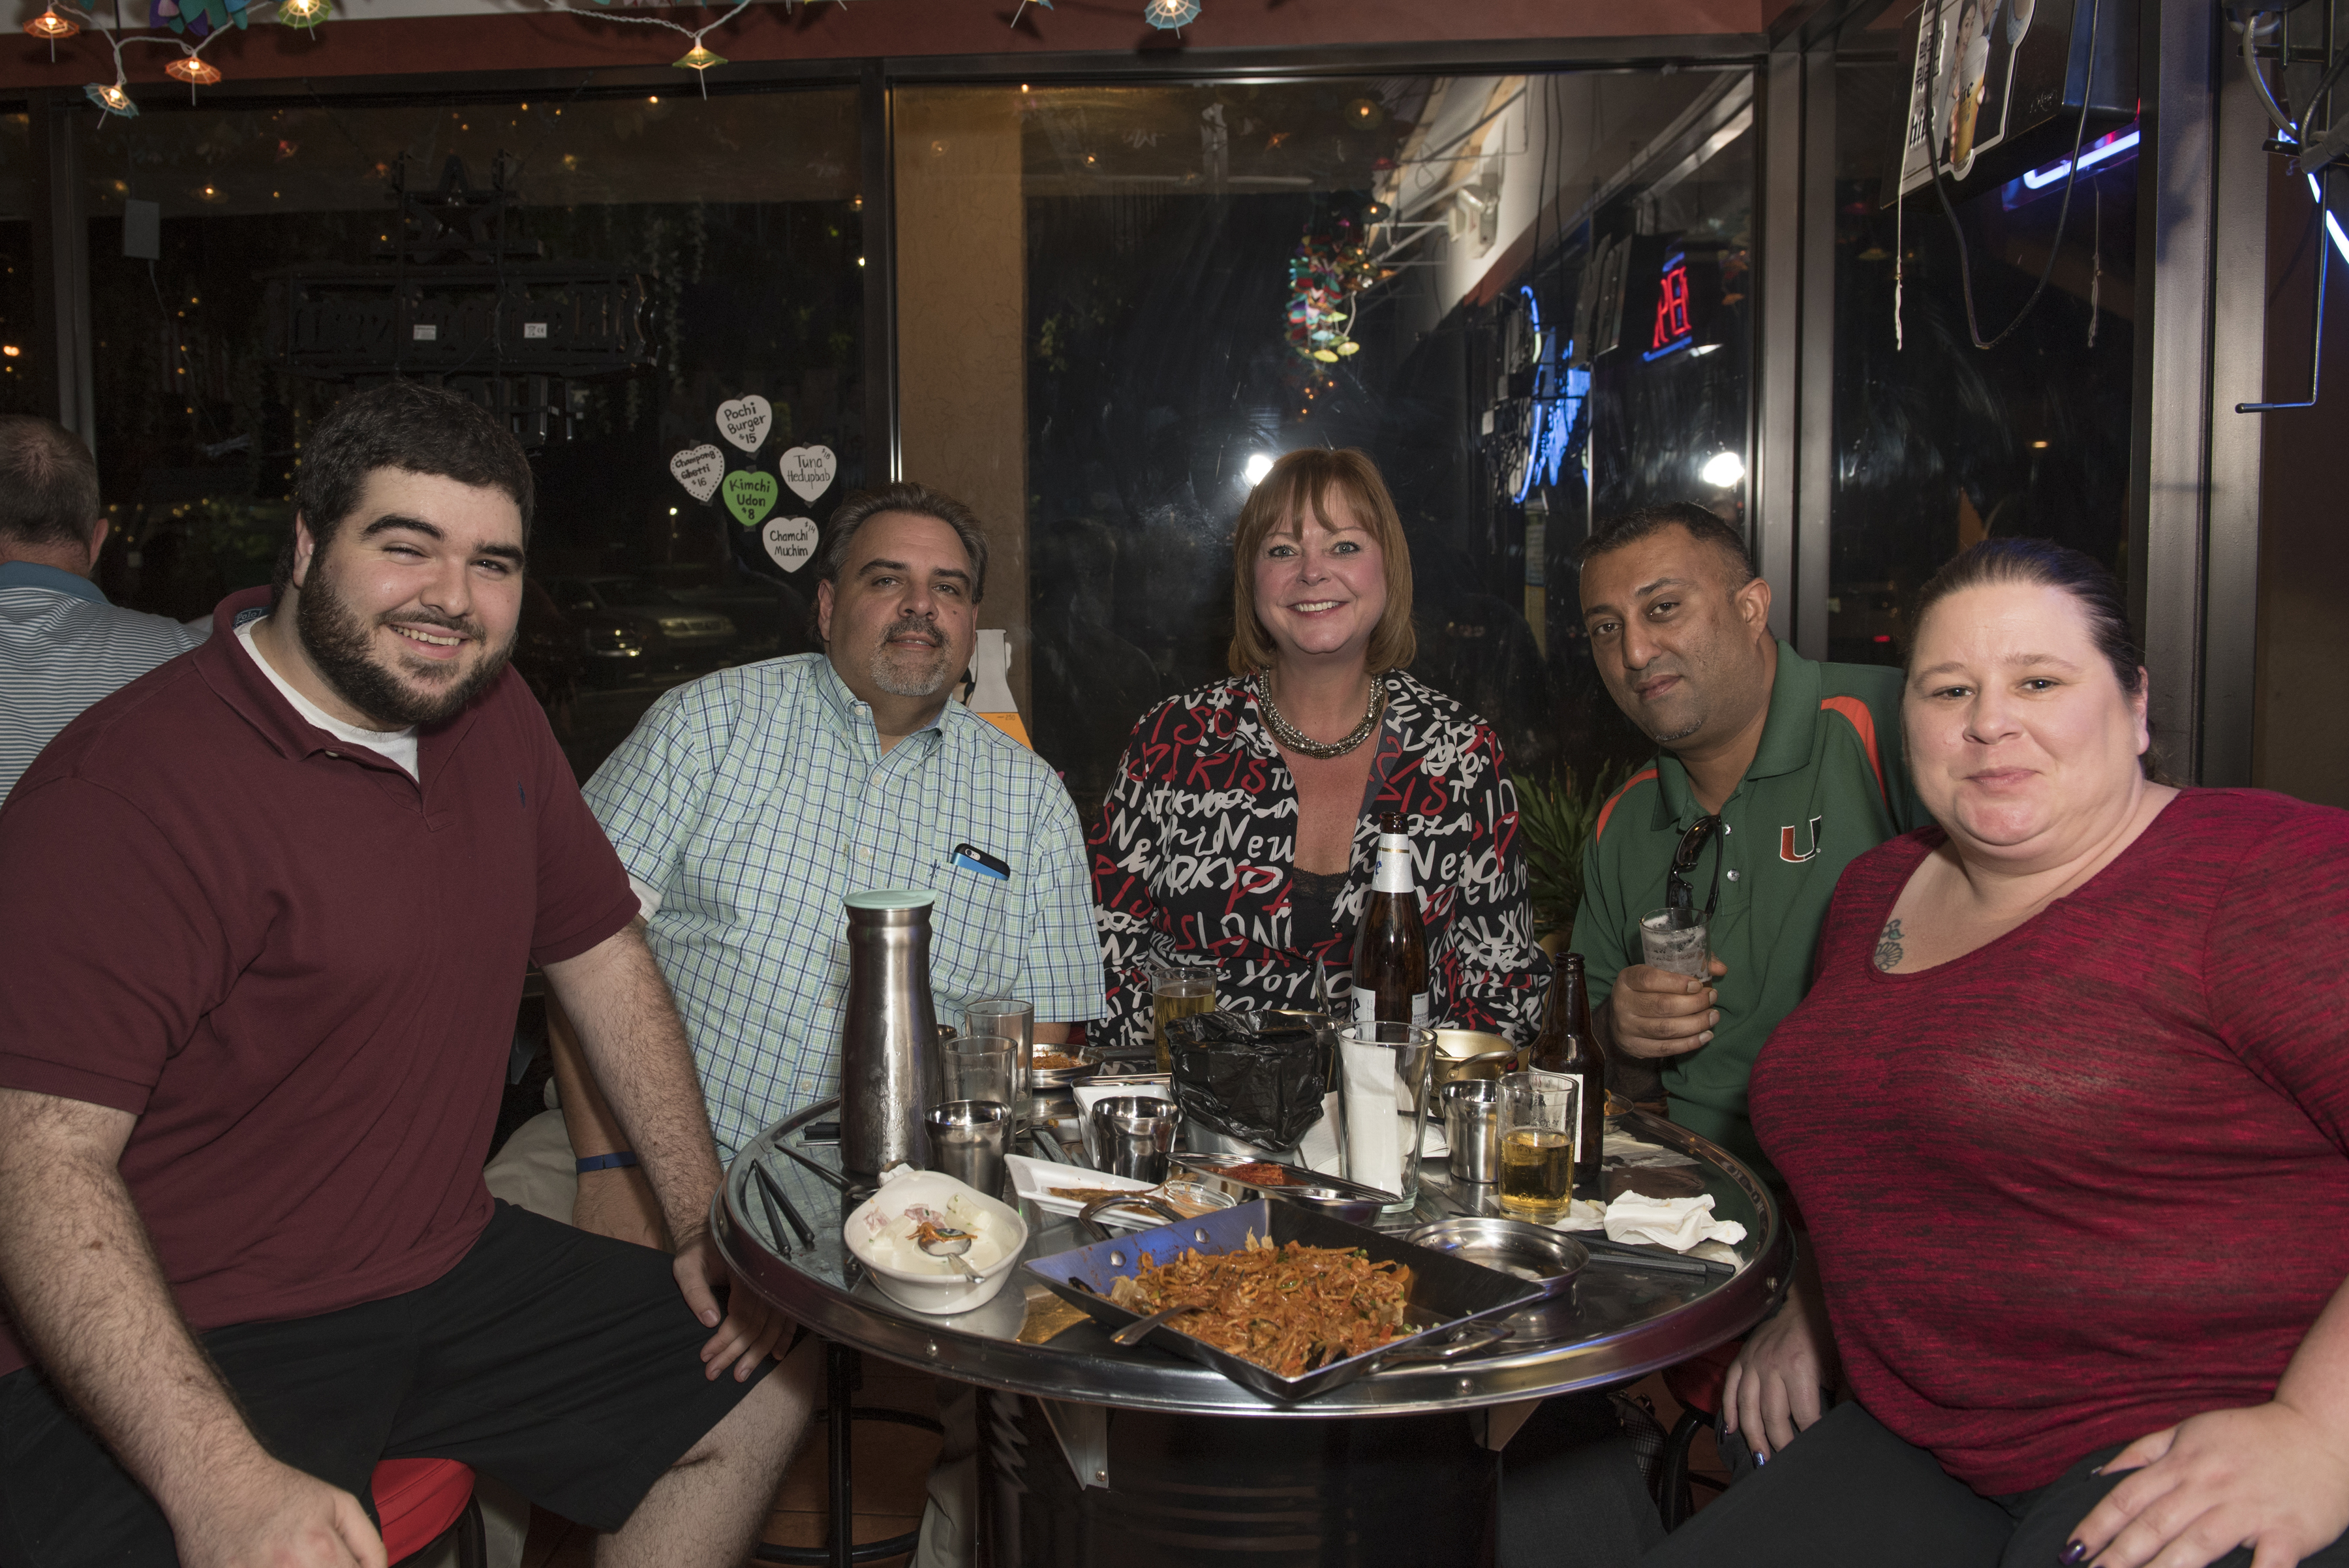 Some of my loyal blog followers; L to R, Kyle, Ron, Carolann, Sonny, and Shelly